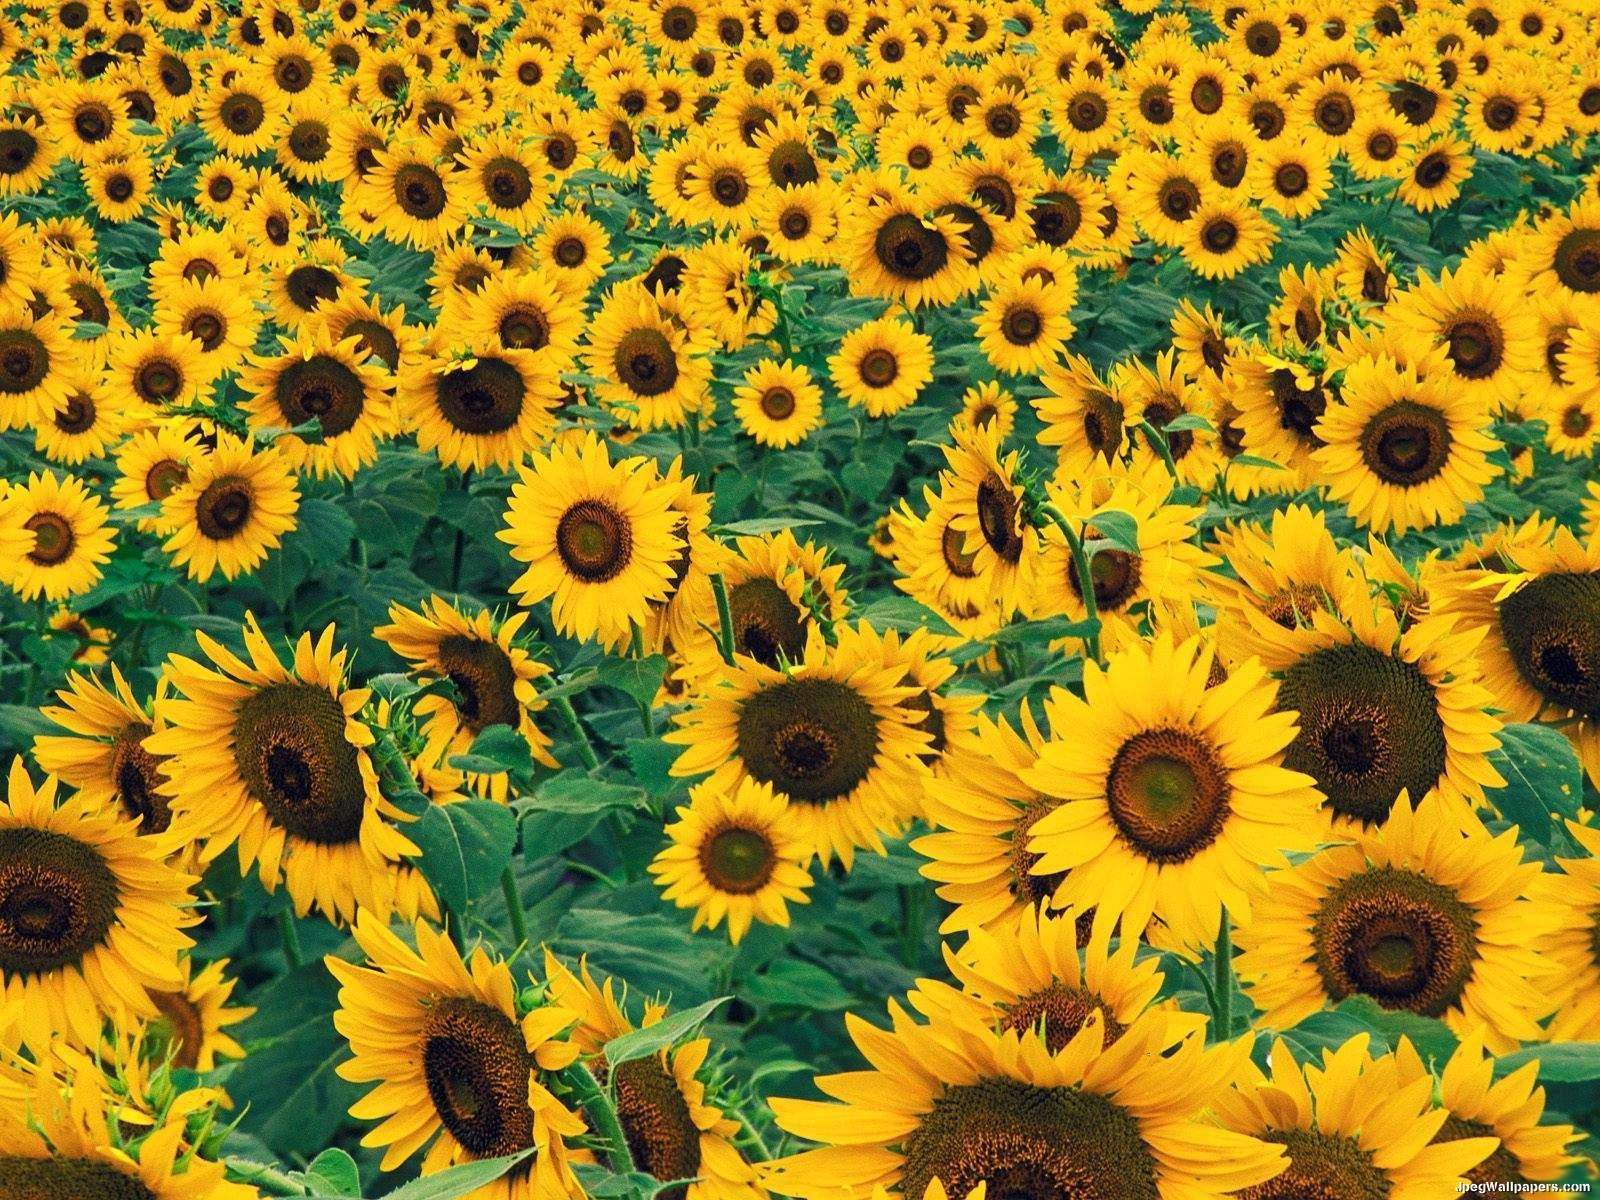 Sunflowers are an all-time garden favourite. They are very easy to grow, making this an ideal garden project for the very young to learn about growing ...